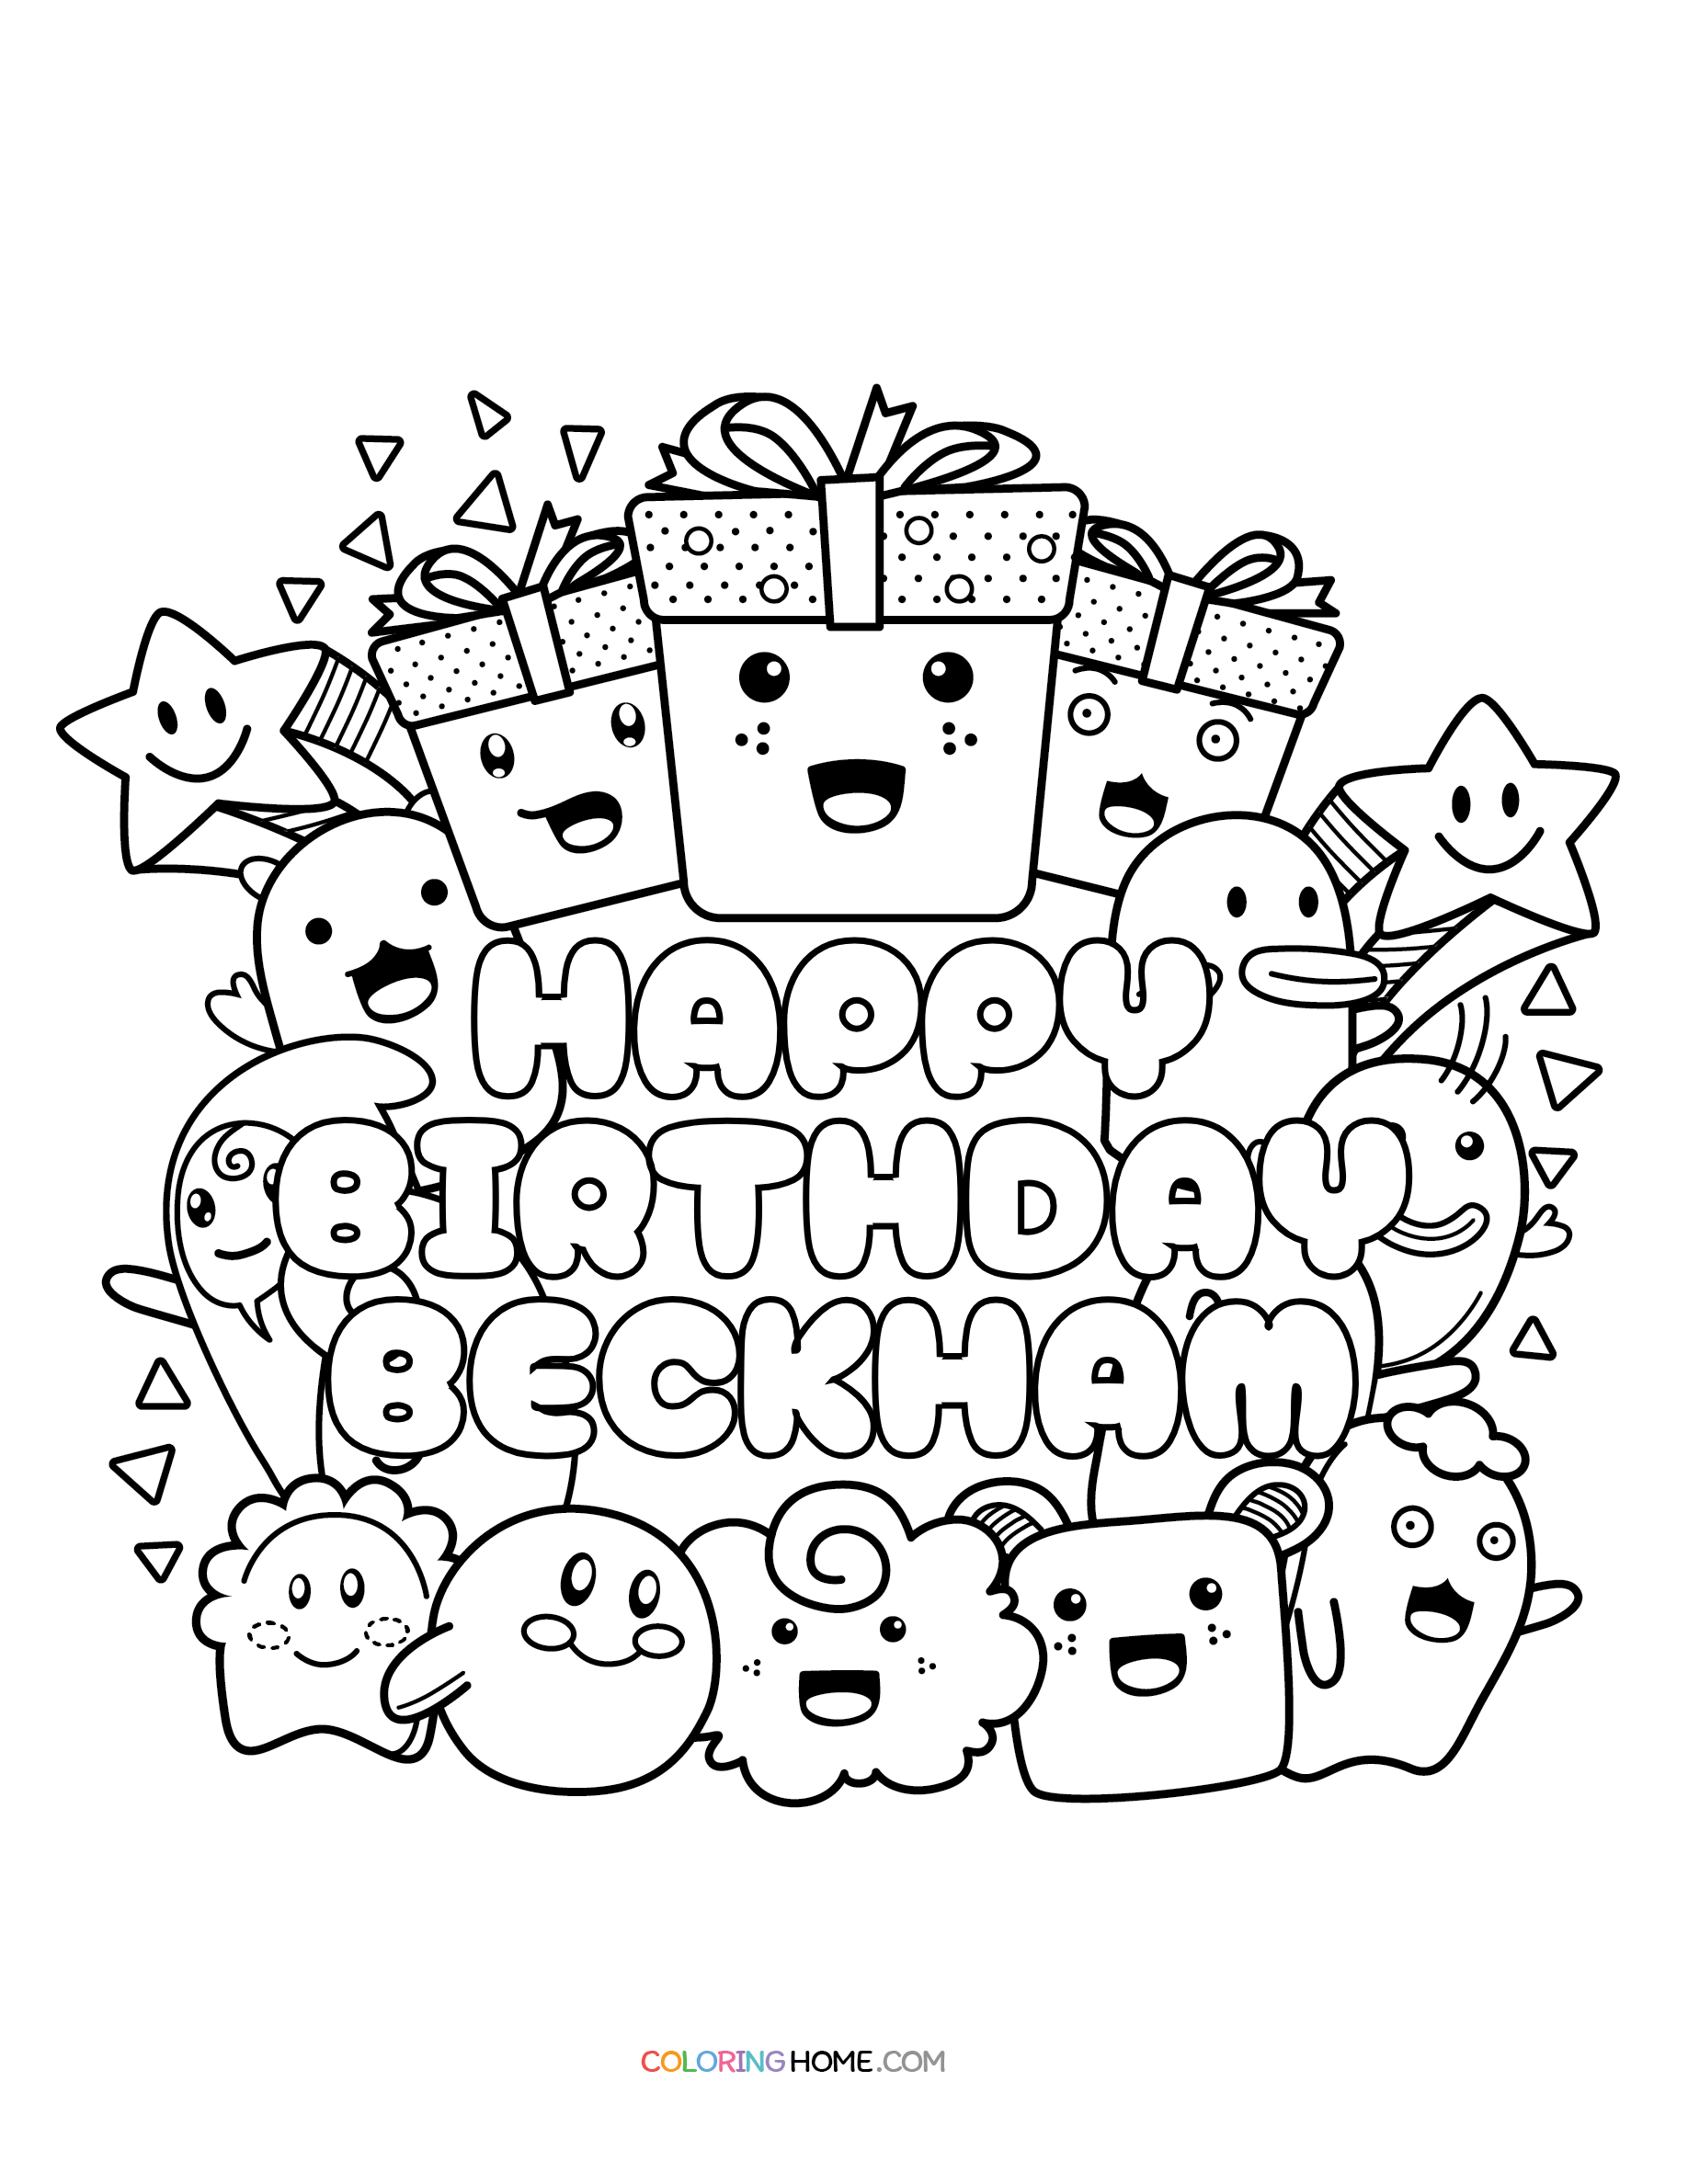 Happy Birthday Beckham coloring page